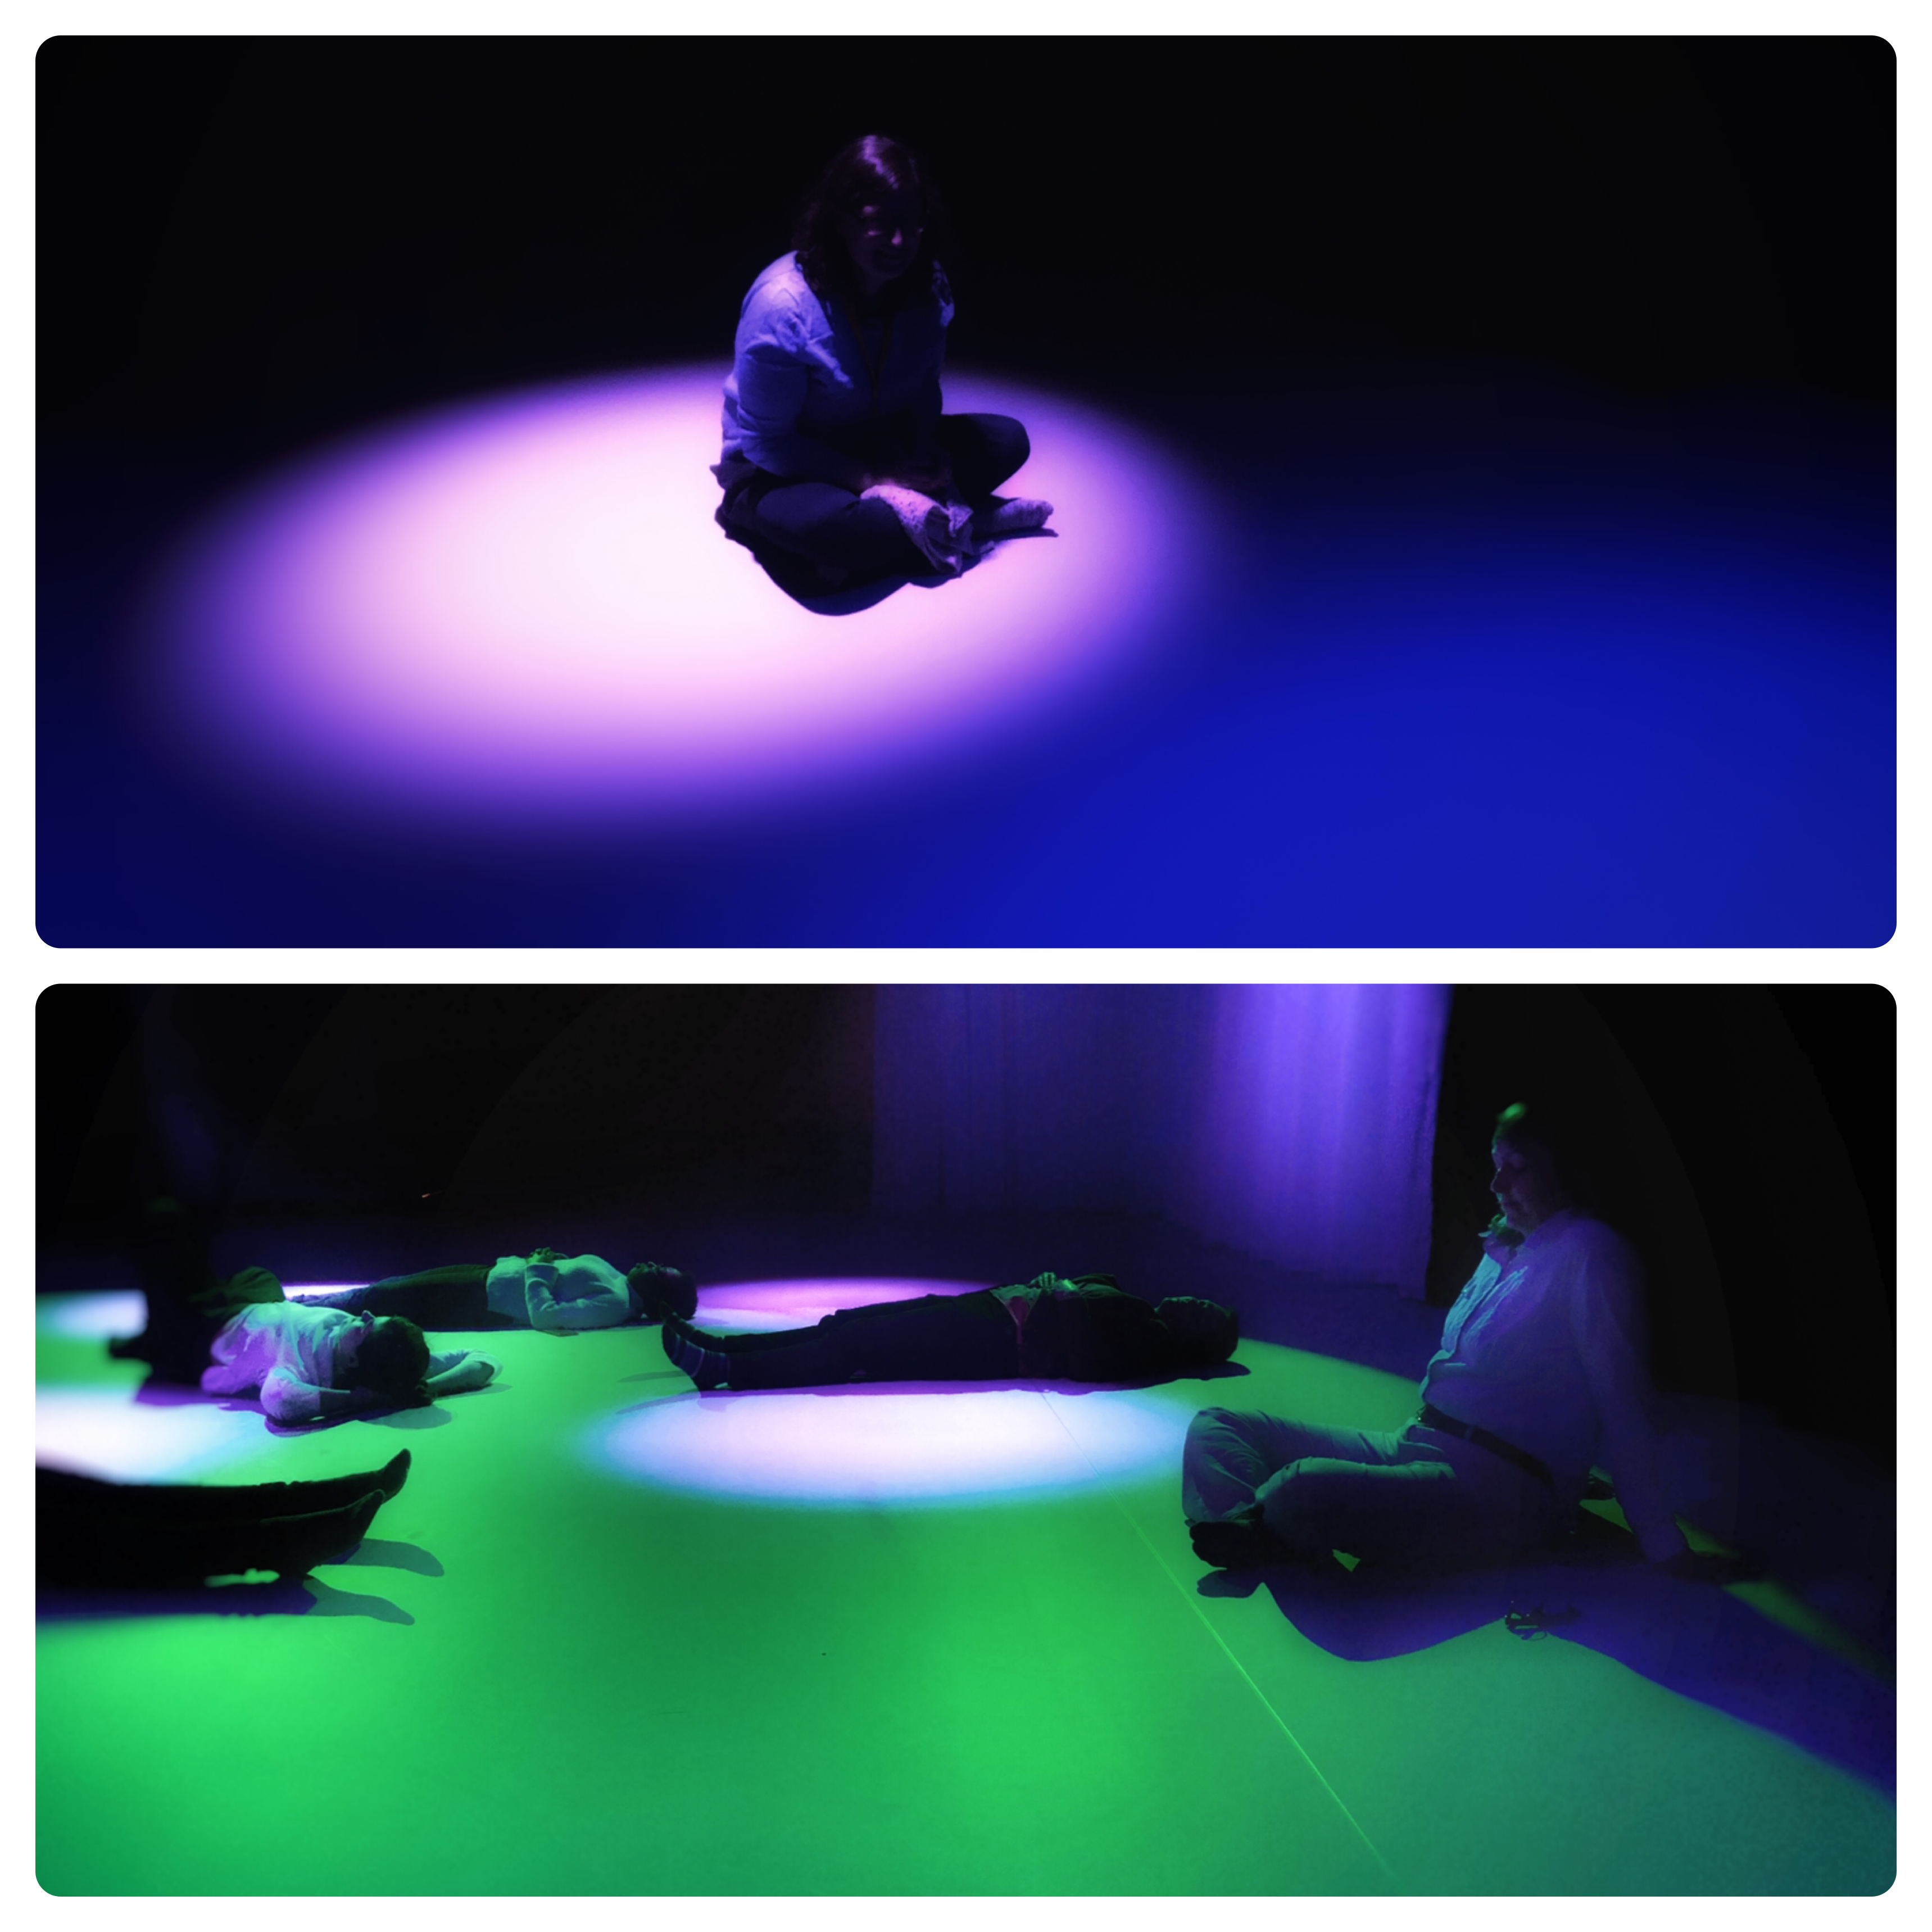 Top: Stillness lab participants lie on the ground immersed in indigo light. Bottom: Participants in green ambient light with purple spotlights.